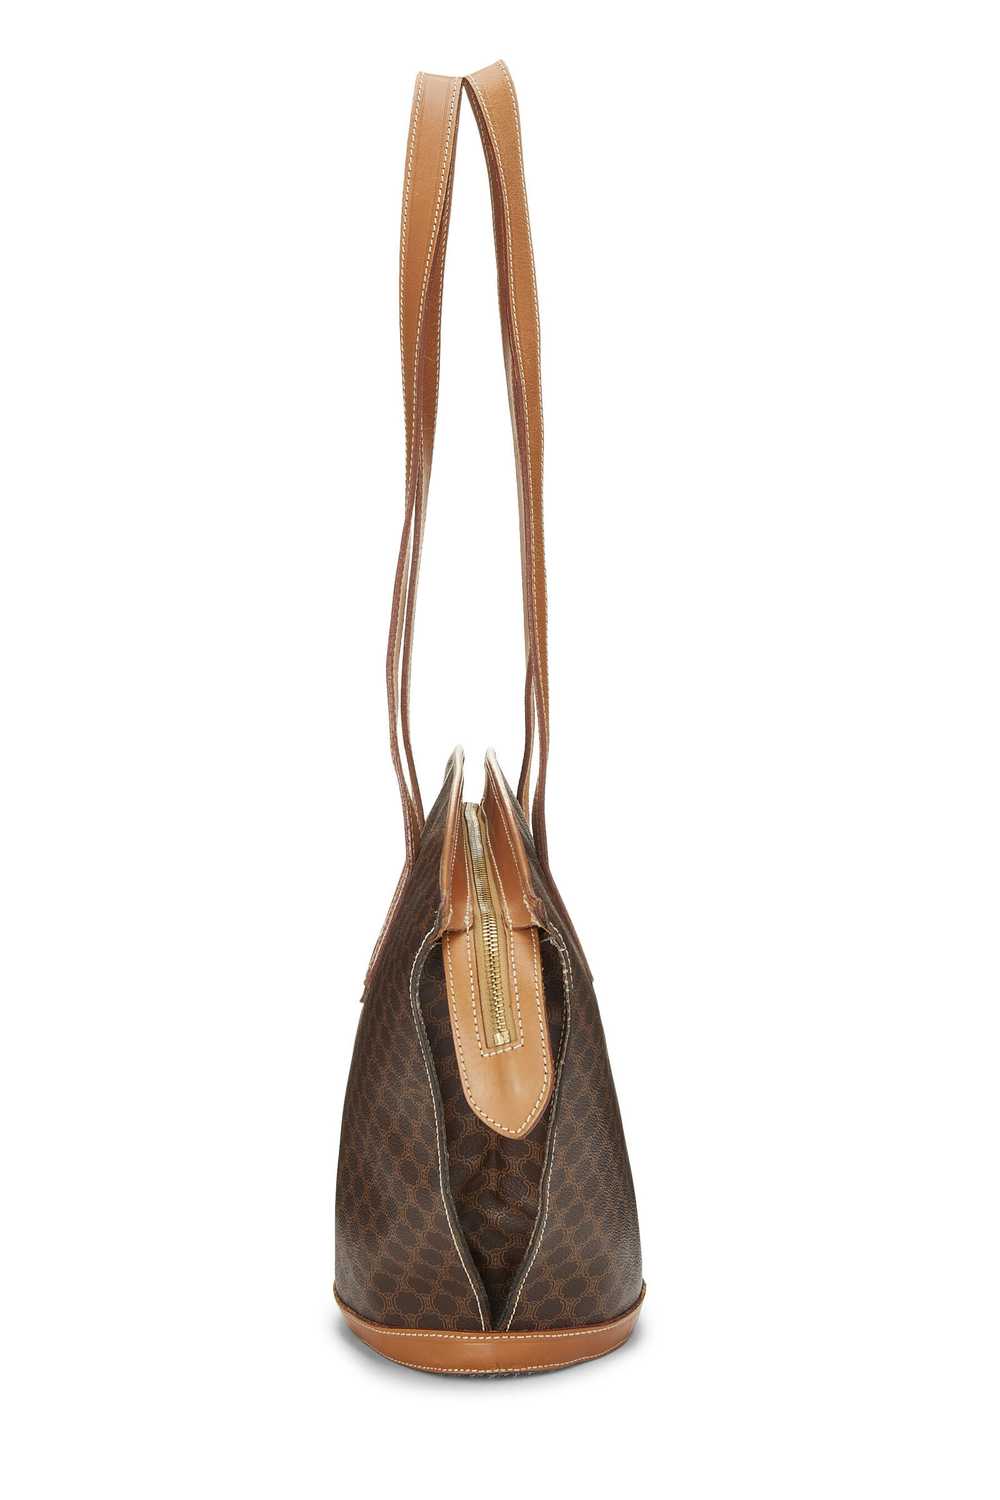 Brown Coated Canvas Macadam Tote - image 3